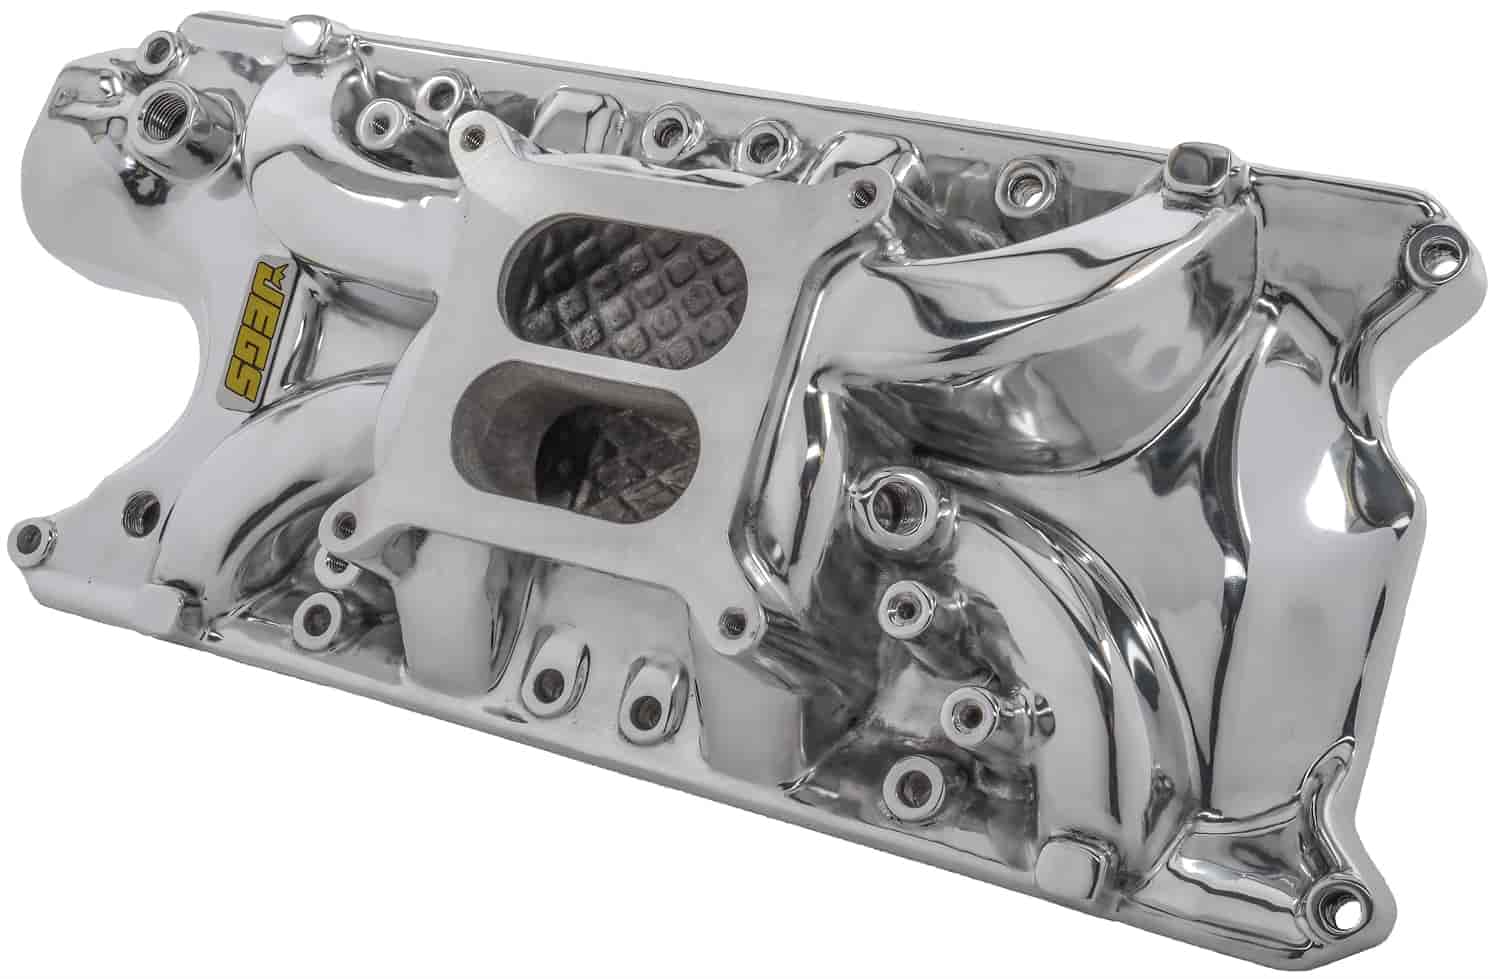 Intake Manifold for 1962-1985 Small Block Ford 260, 289 & 302 (Except Boss 302), Dual Plane 4-BBL [Polished]